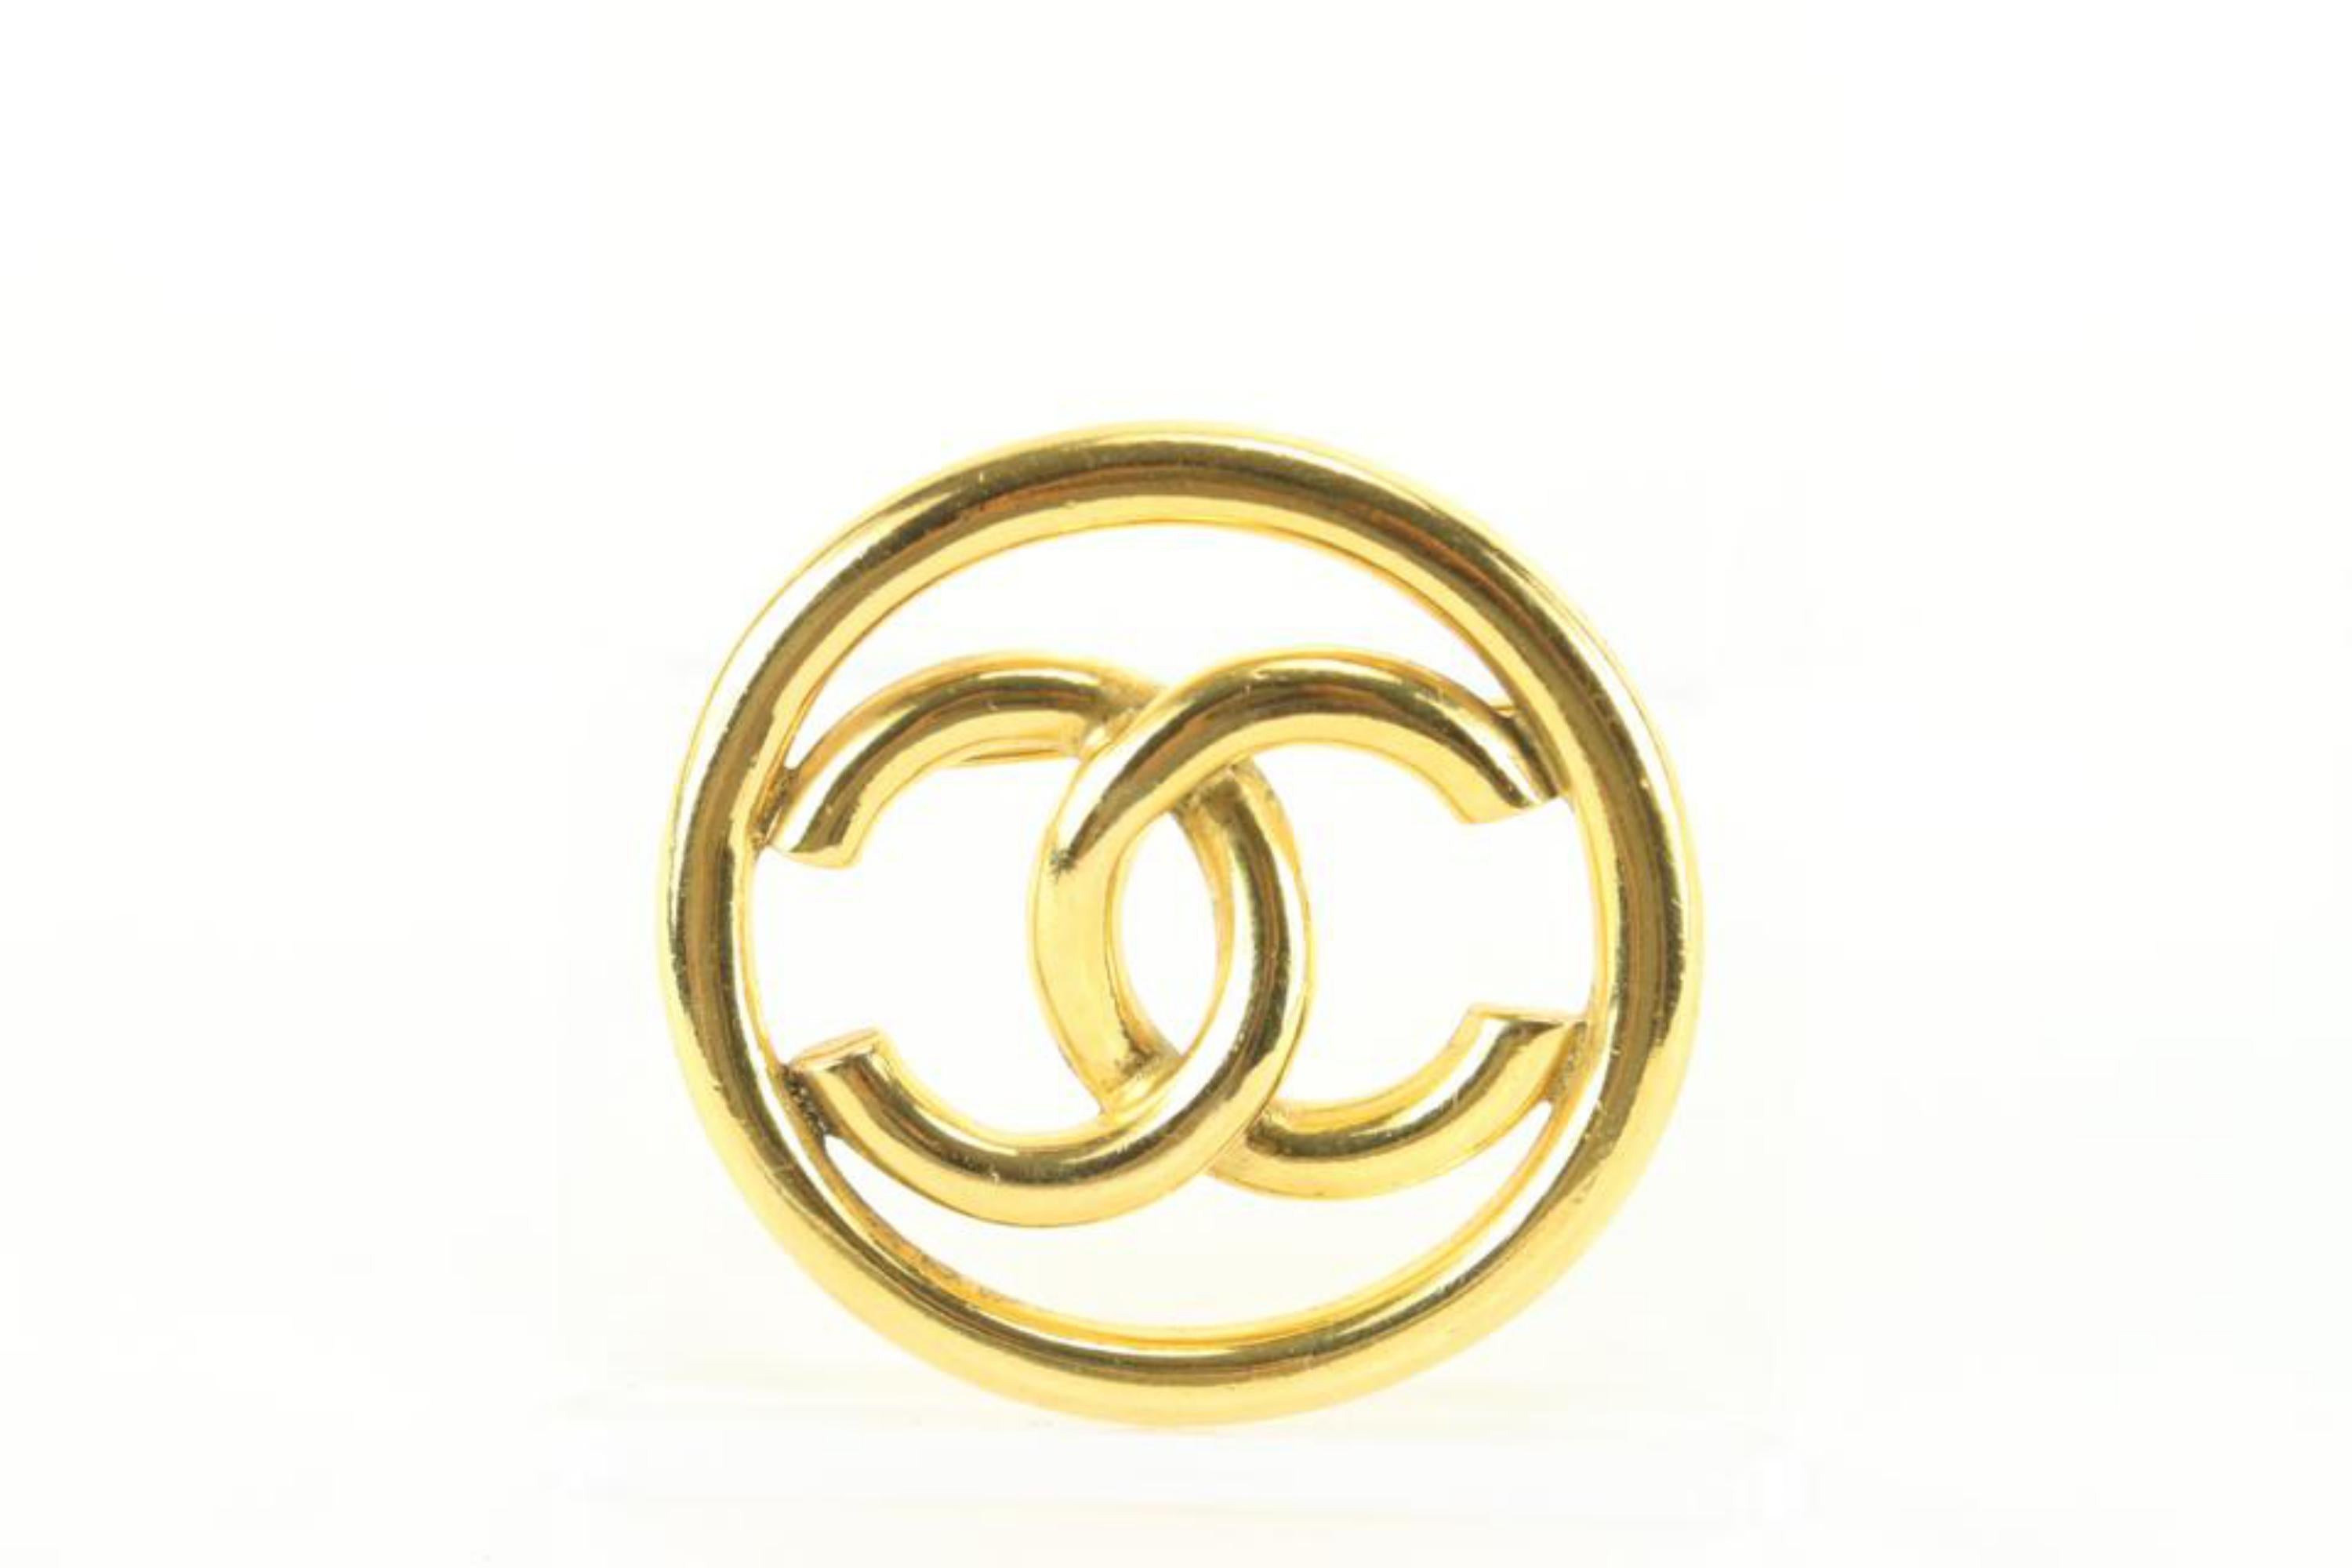 Chanel 93P 24k Gold Plate CC Logo Circle Brooch Pin 31ck824s For Sale 7